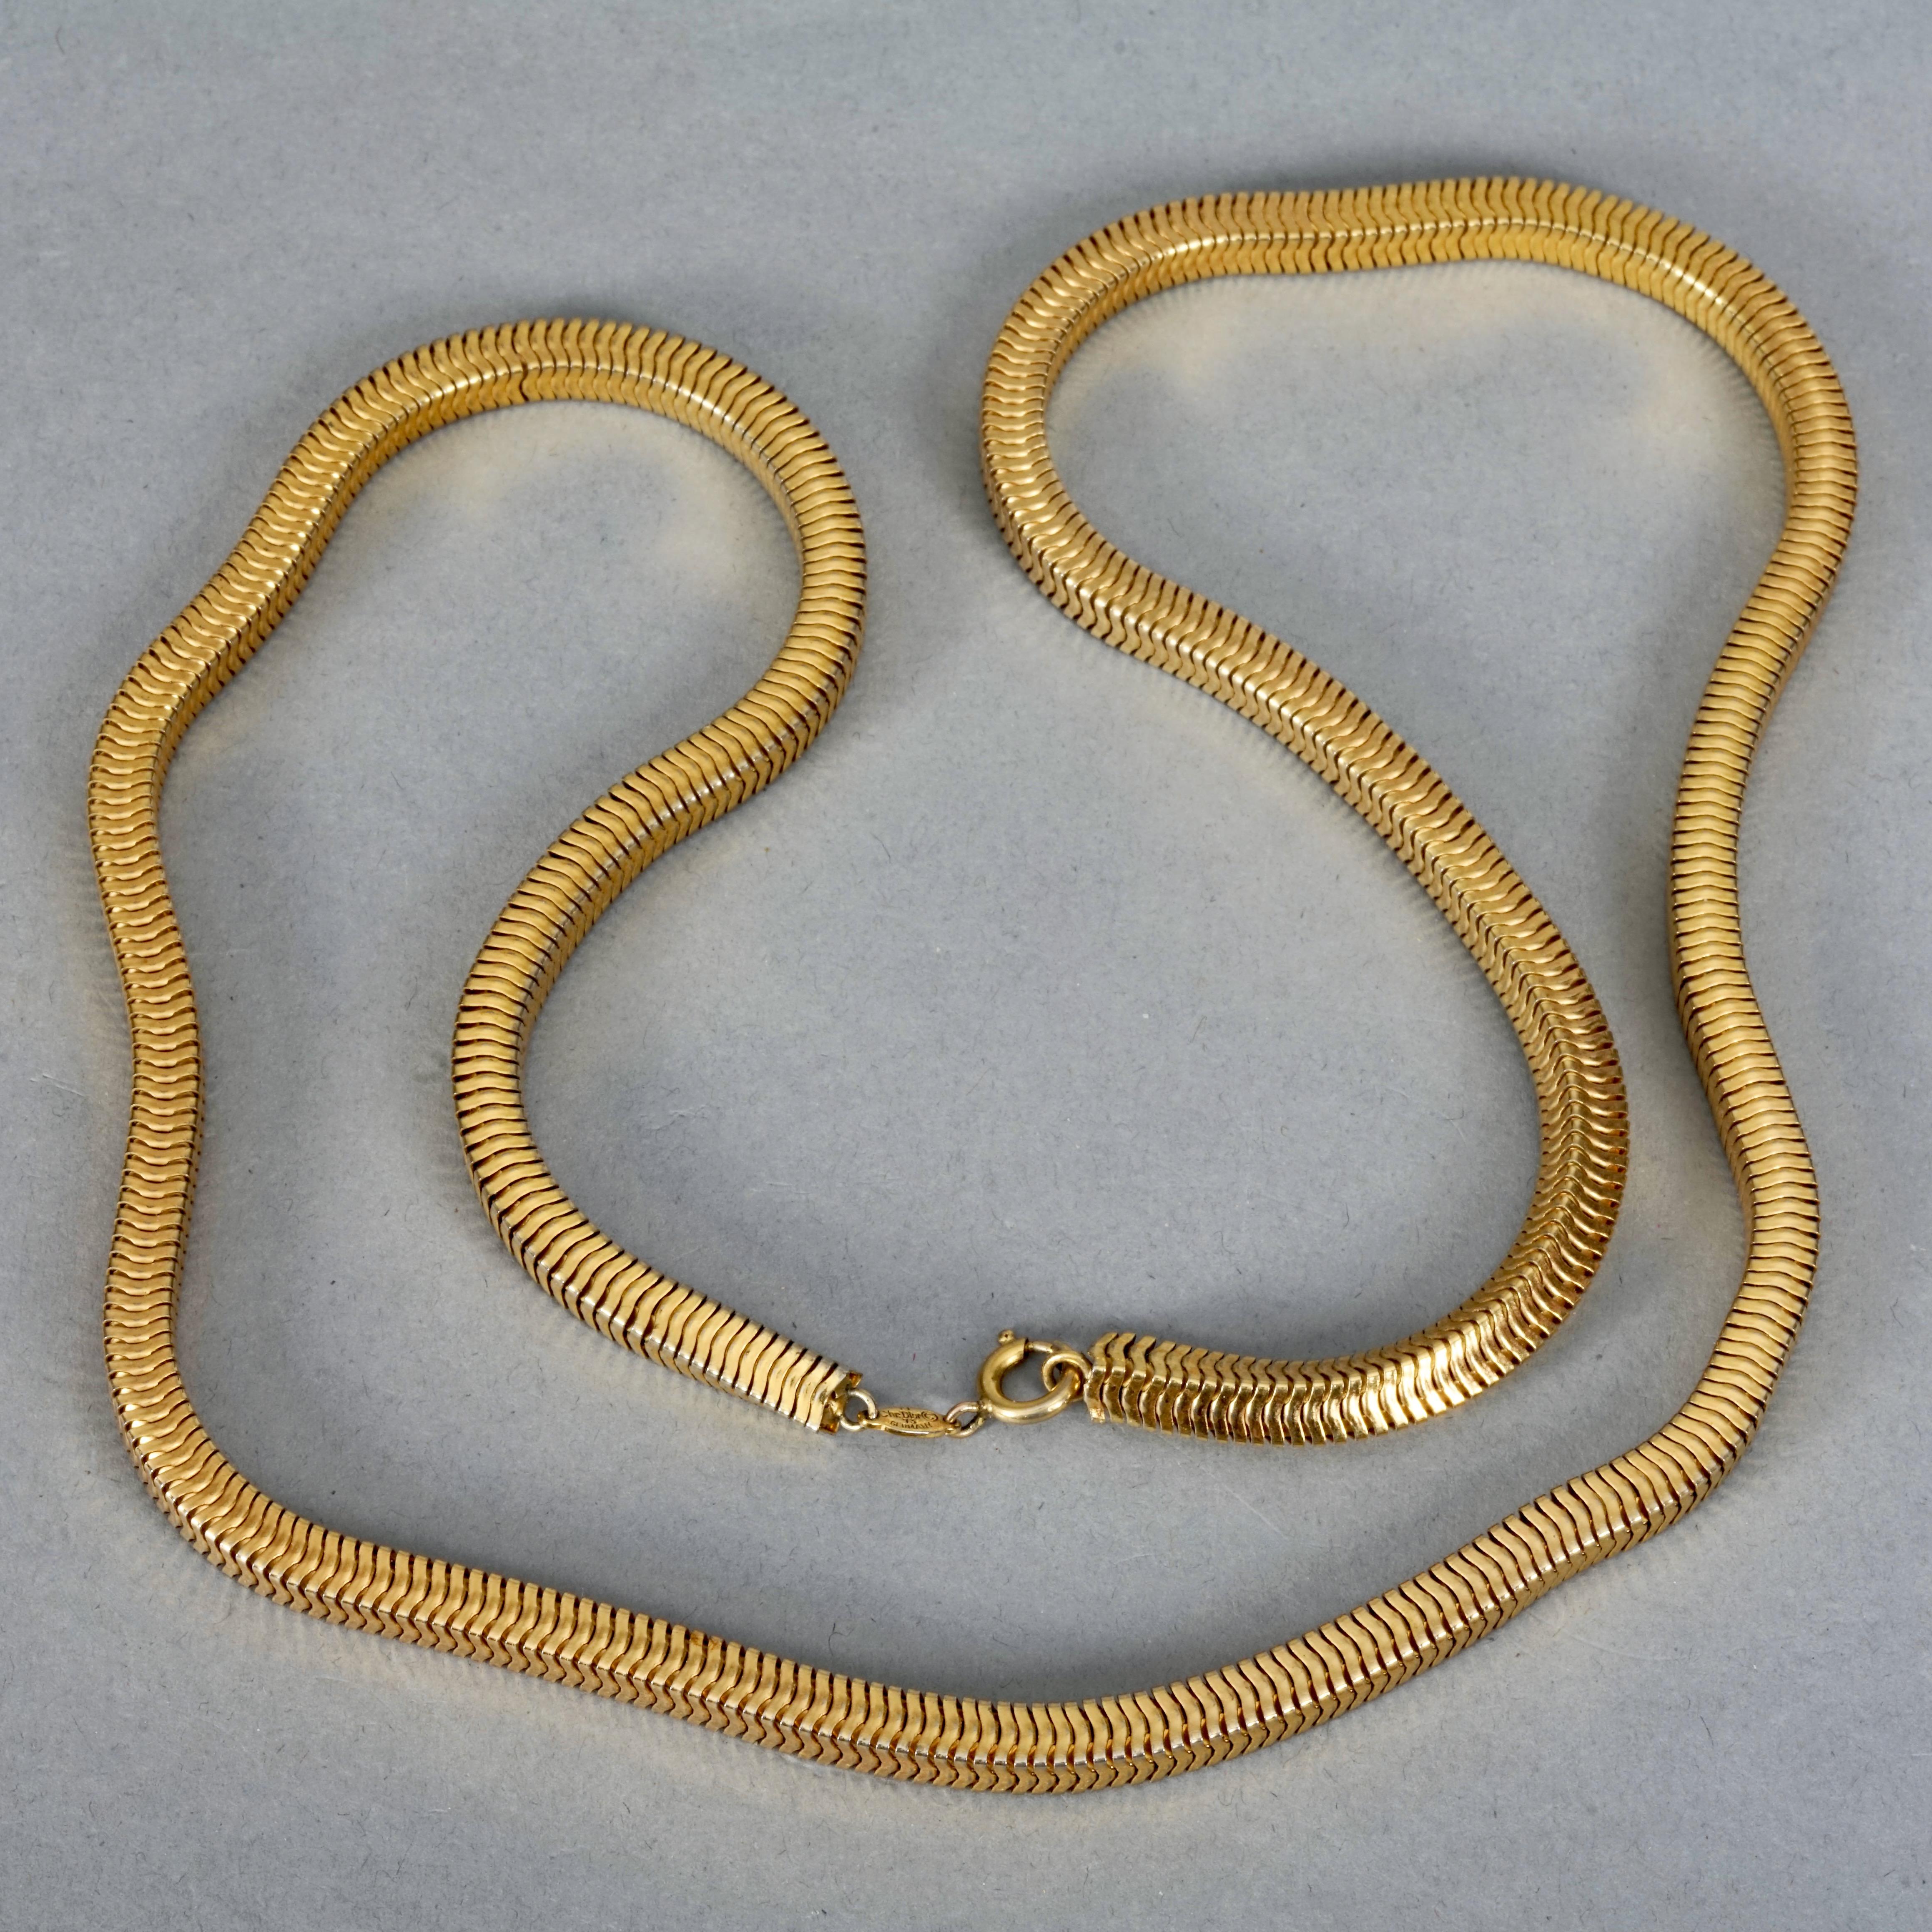 Vintage 1973 CHRISTIAN DIOR Gold Snake Chain Necklace For Sale 2